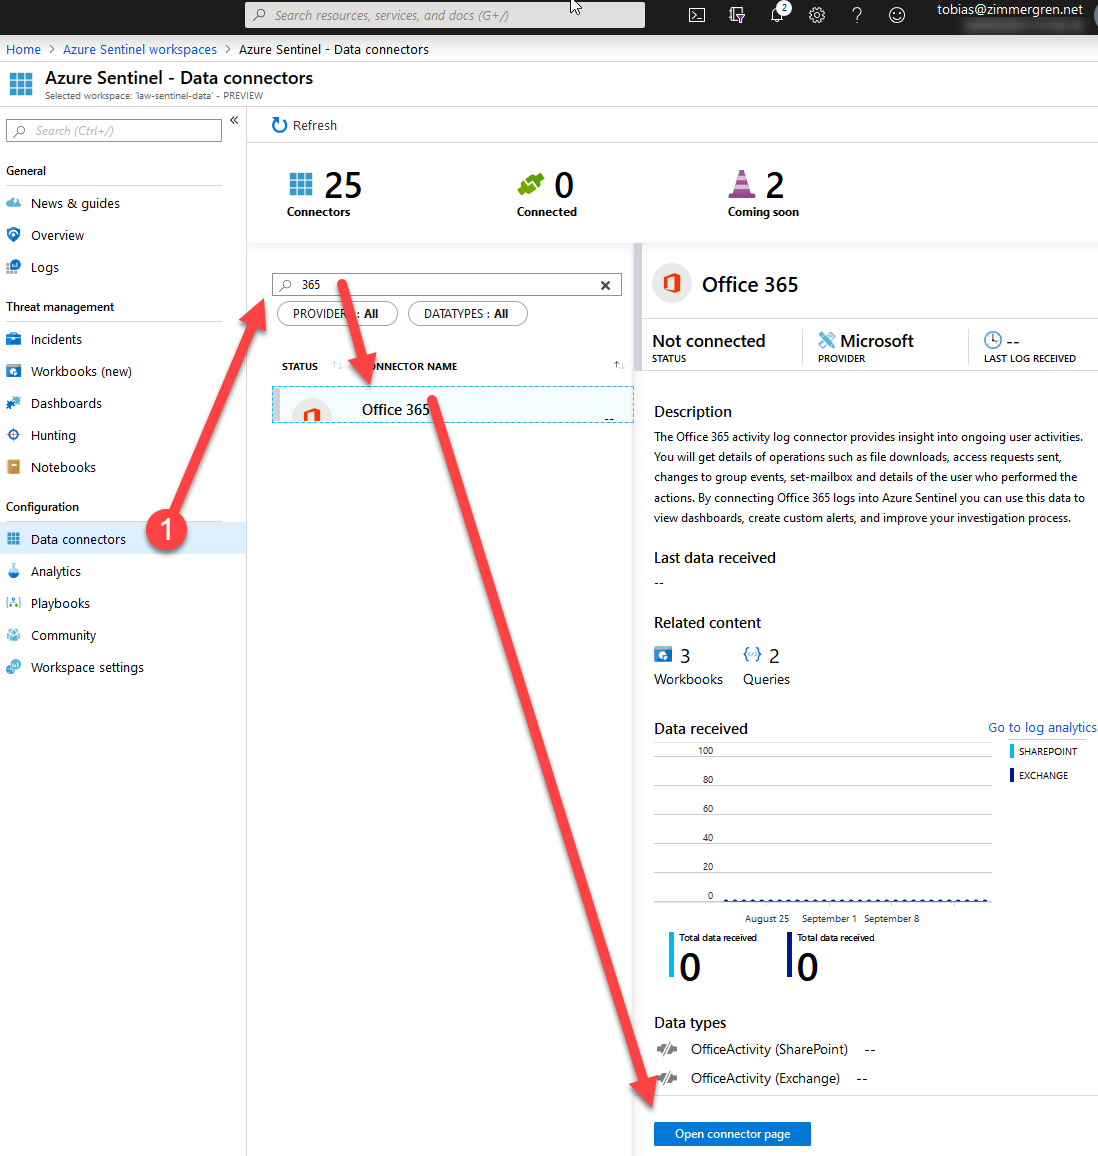 Monitoring Office 365 tenants with Azure Sentinel